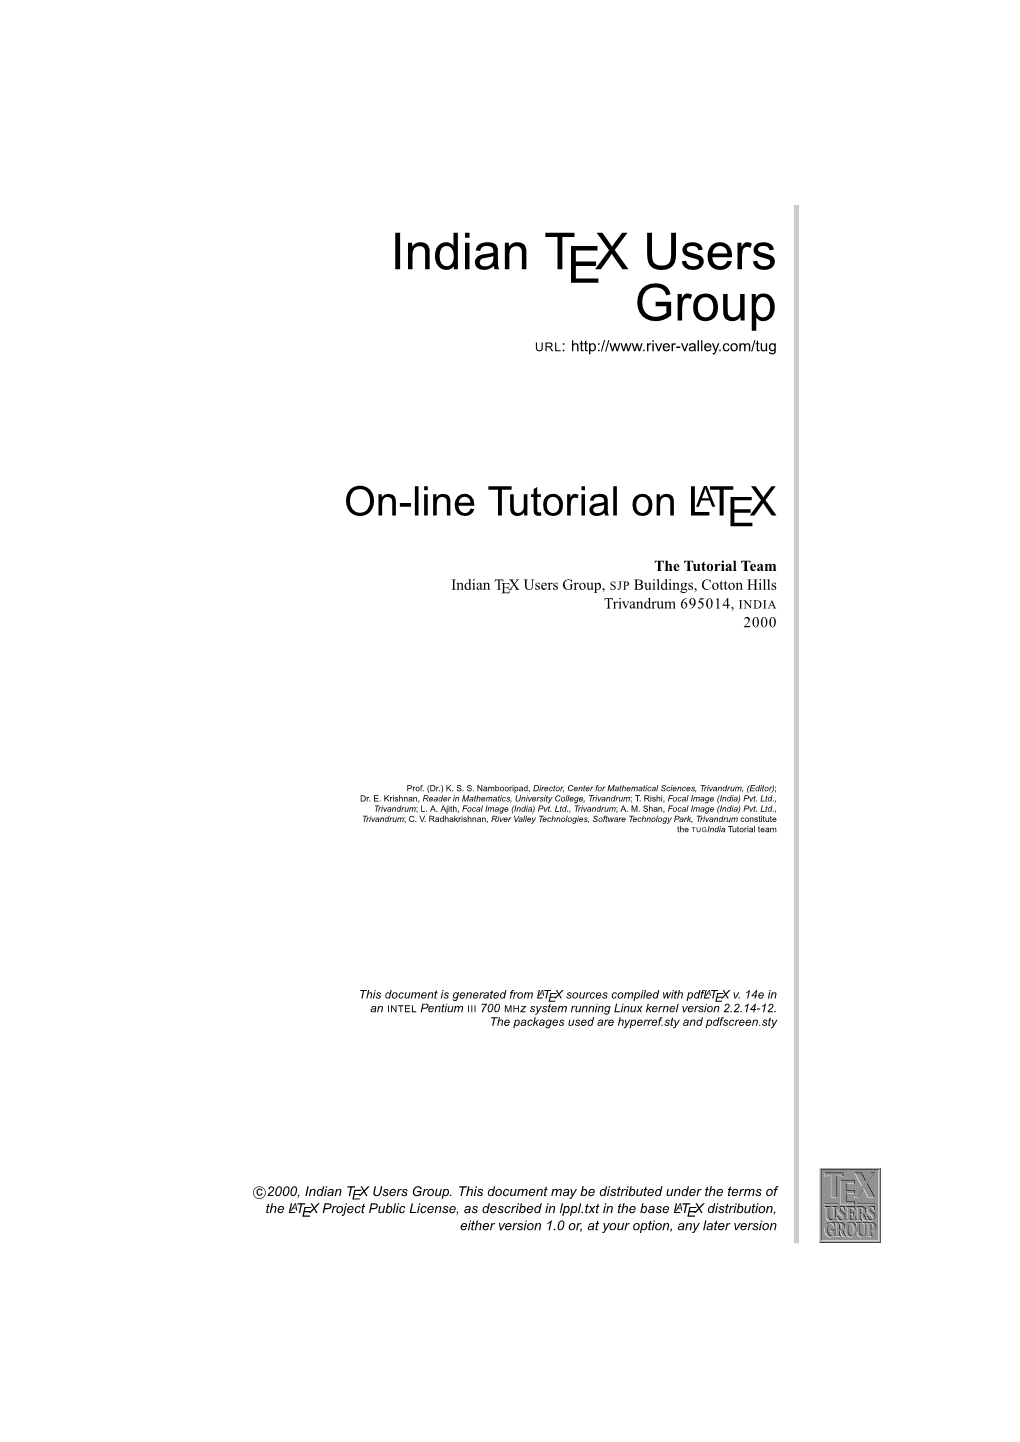 Indian TEX Users Group URL